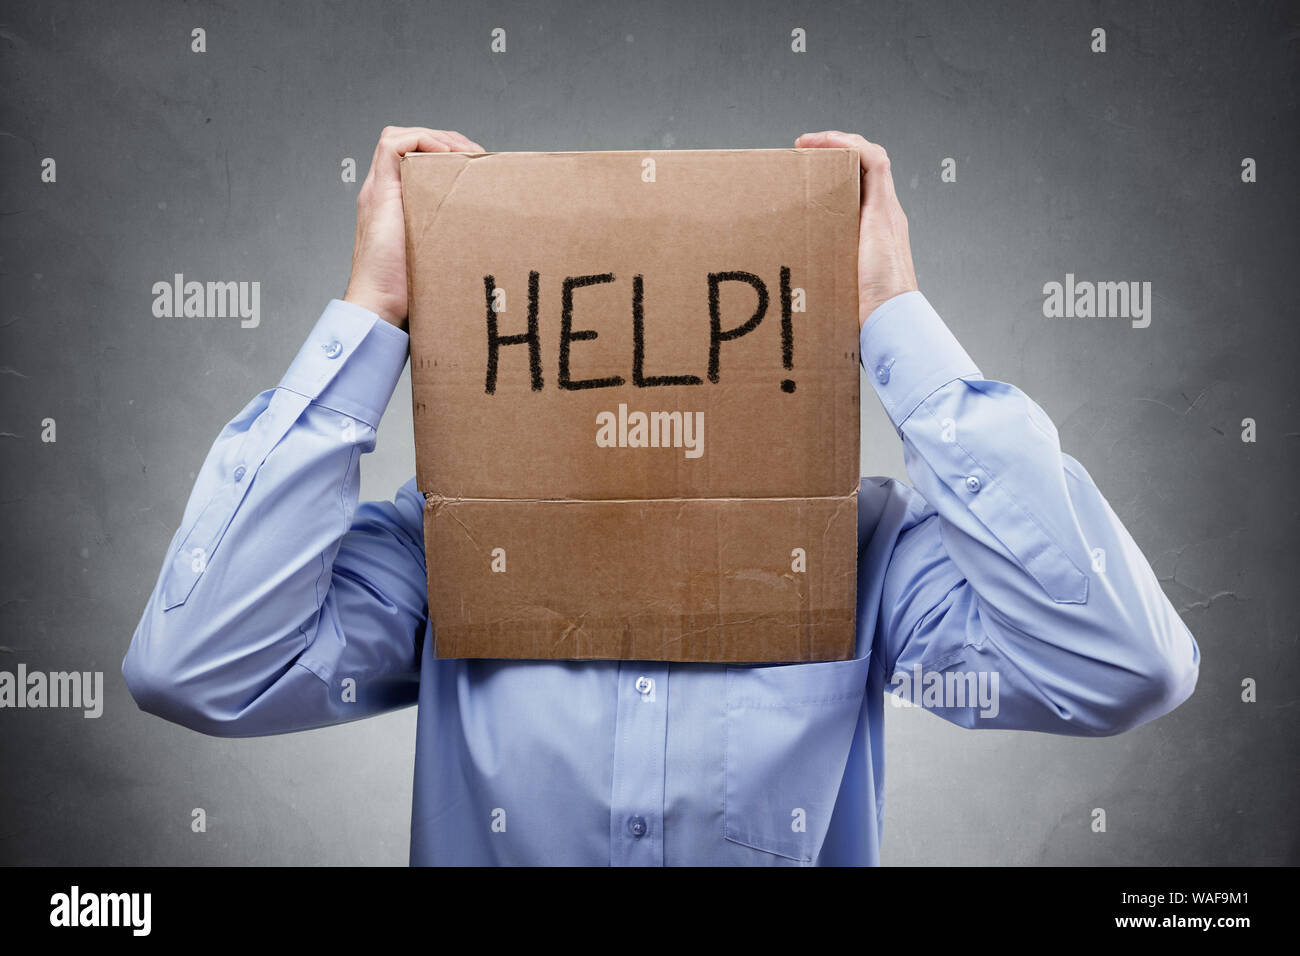 Cardboard box on businessman head asks for help concept for problems, support, overworked or stress Stock Photo